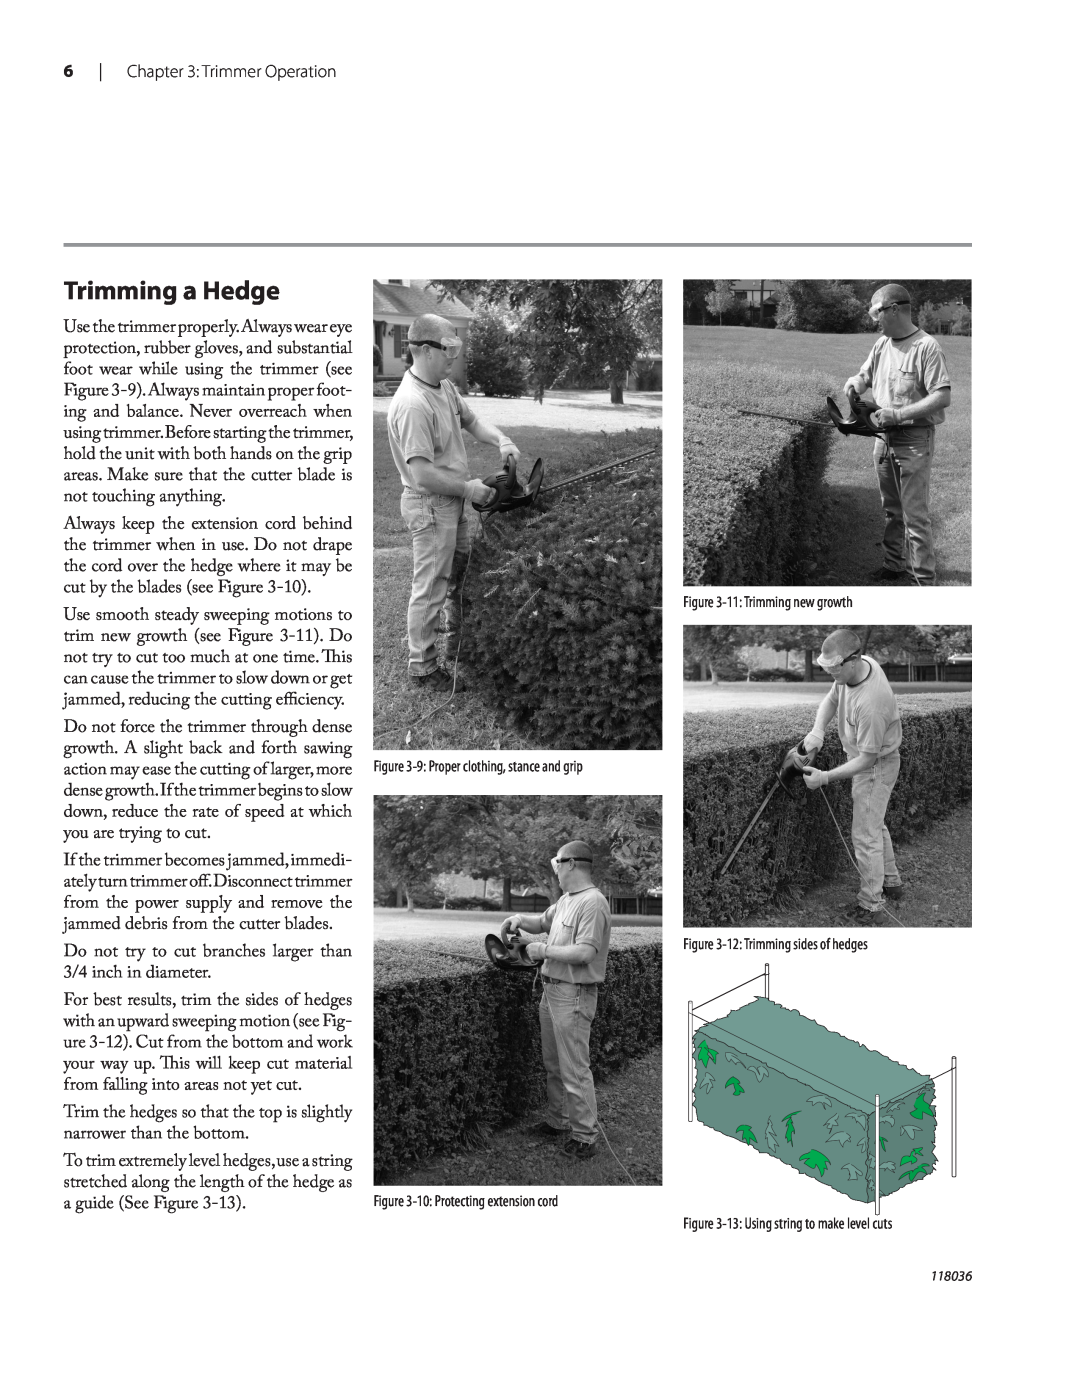 Remington Power Tools HT3218A, HT4022A owner manual Trimming a Hedge 